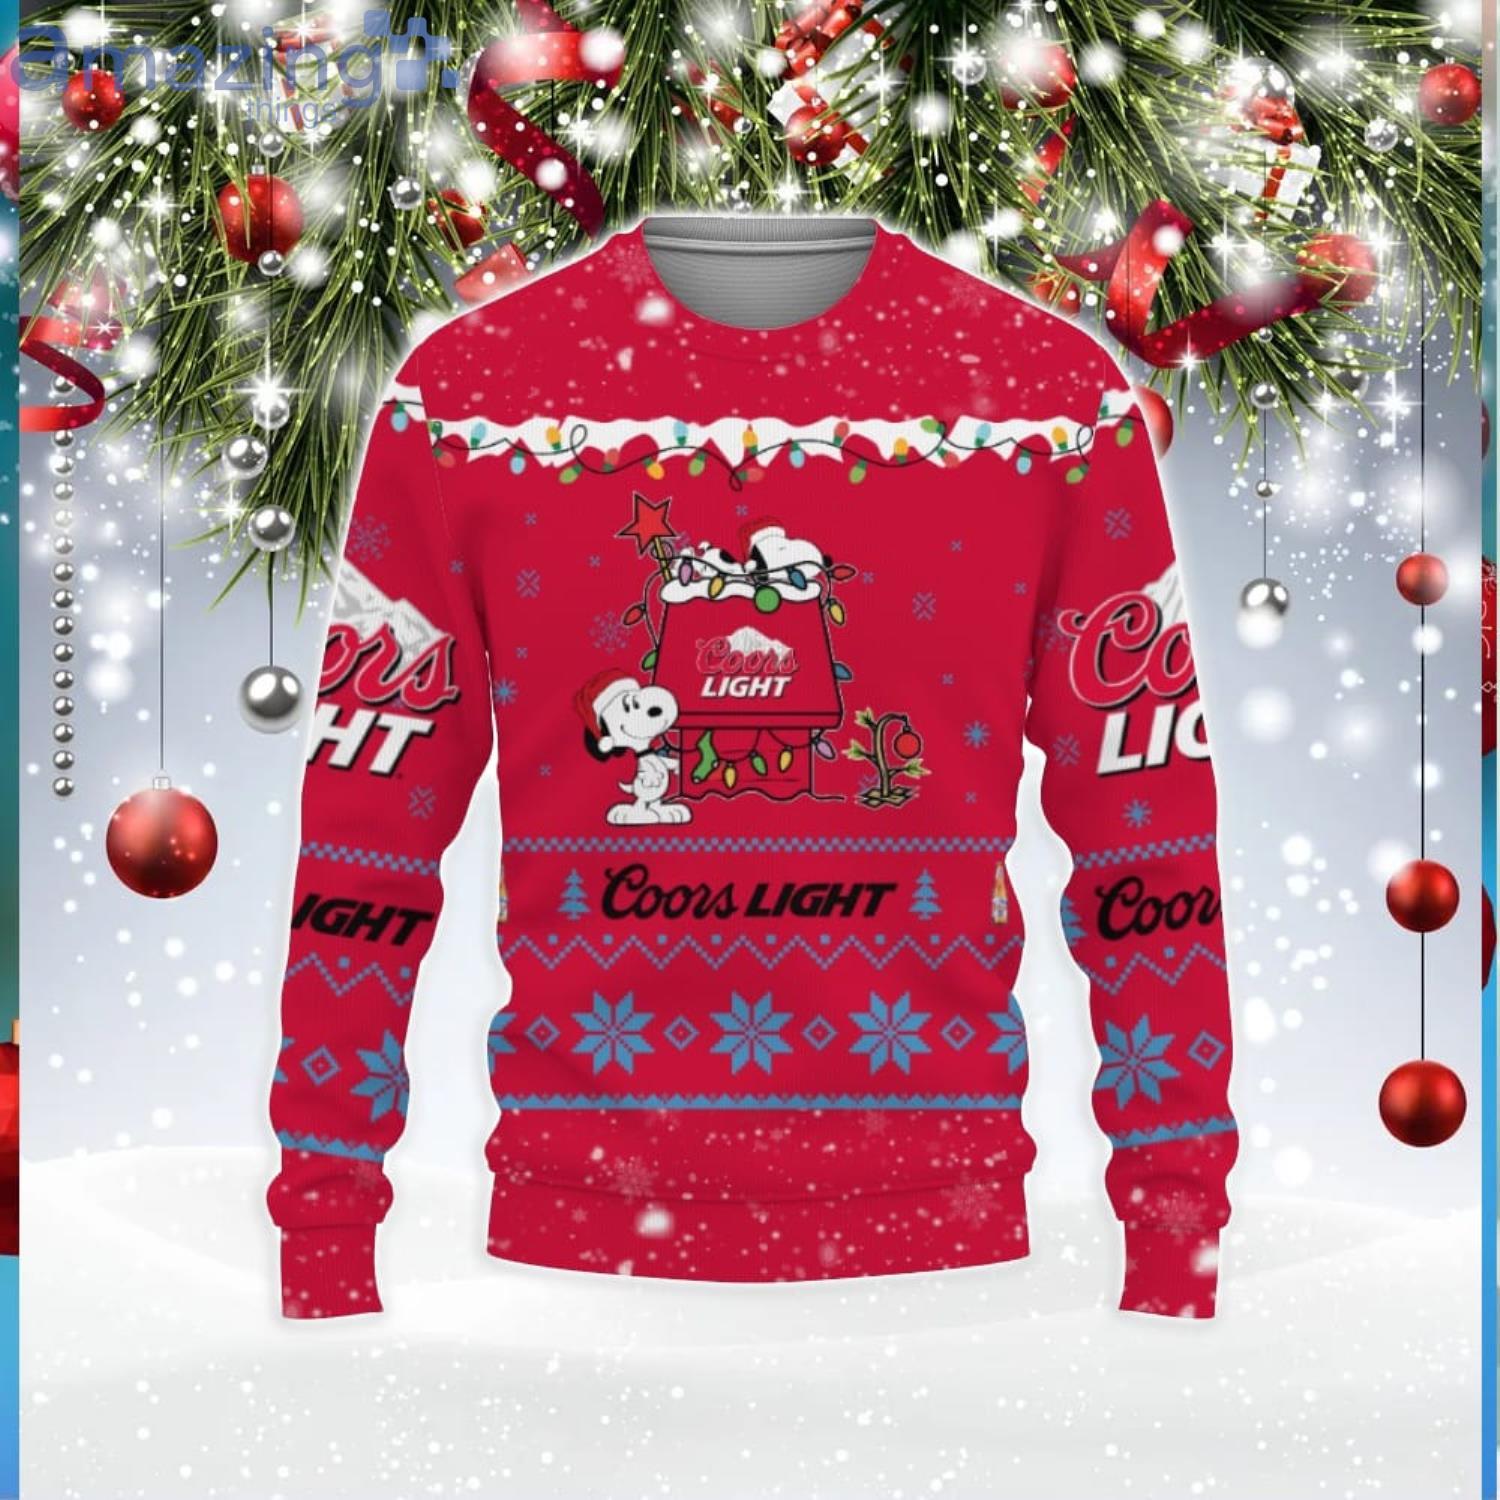 Coors Light Beers American Whiskey Beers Merry Christmas Snoopy House Cute Gift 3D Ugly Christmas Sweater Product Photo 1